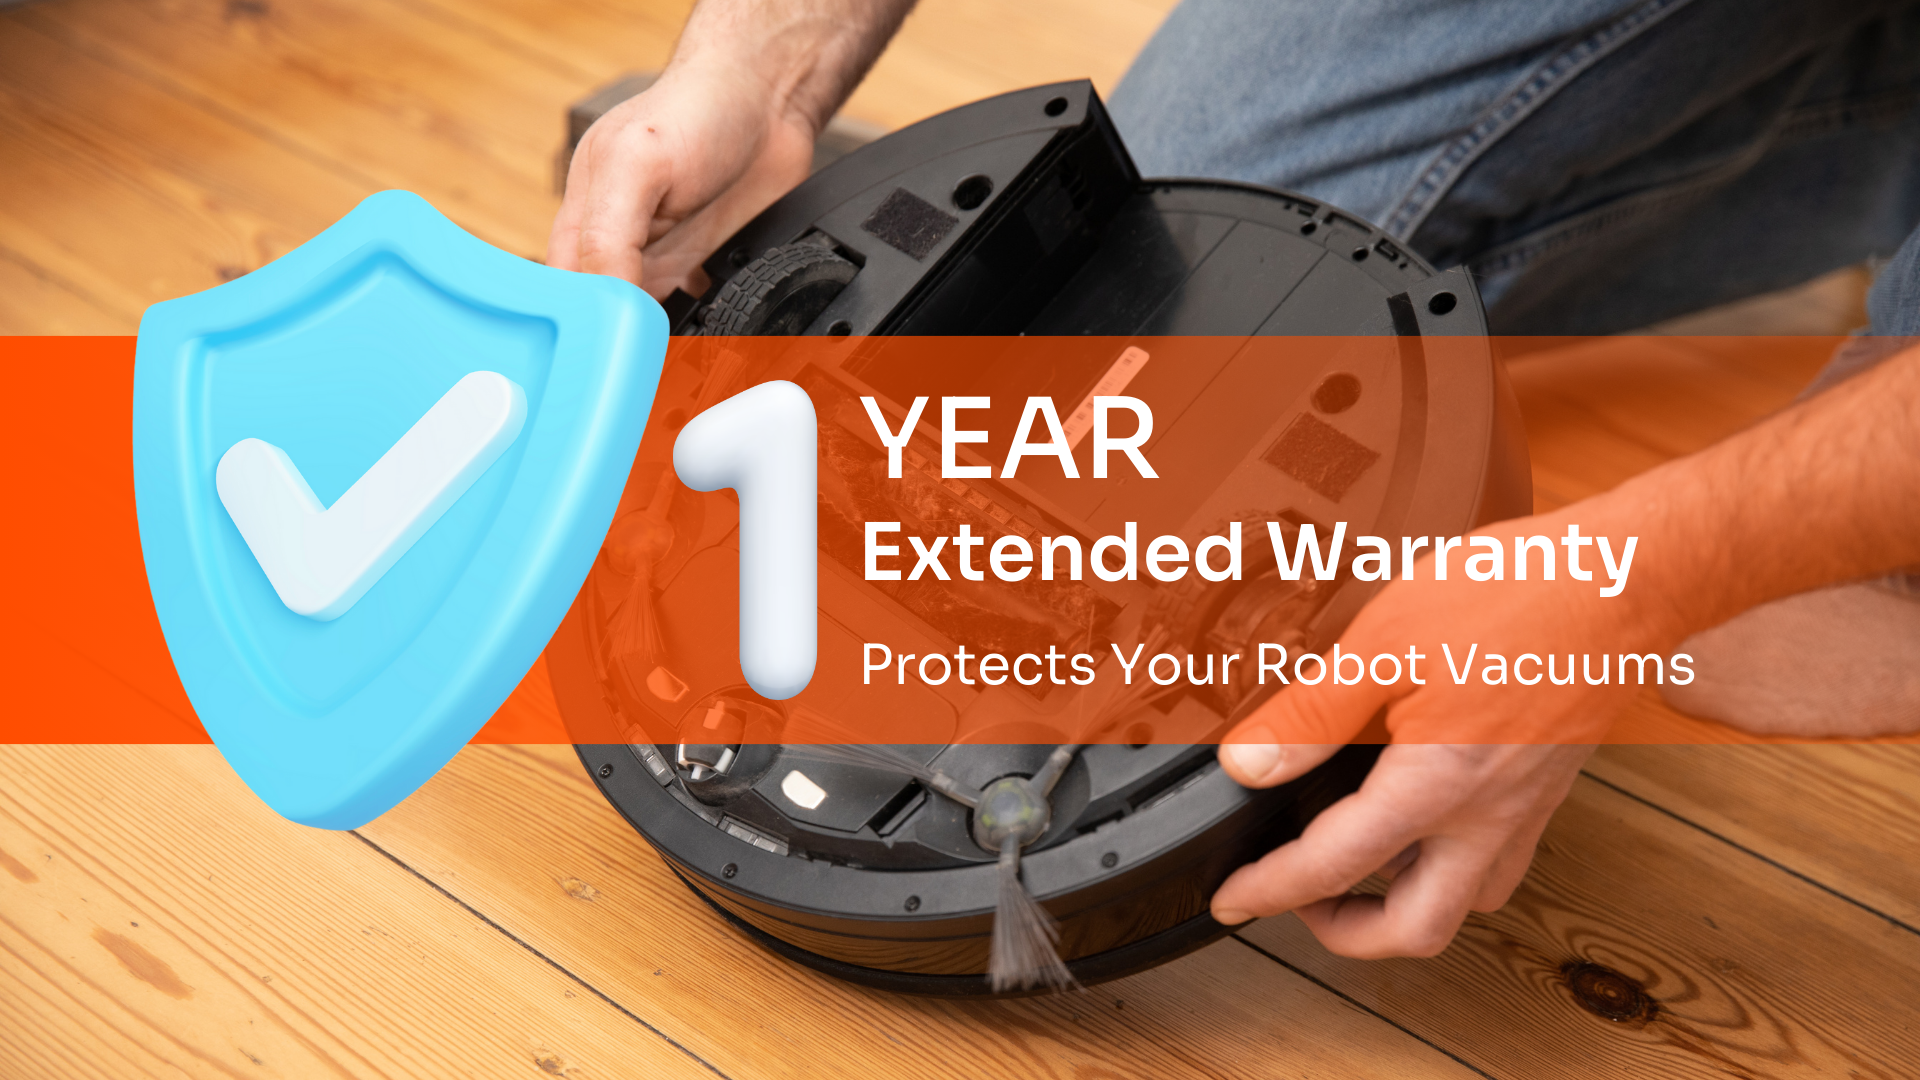 ILIFE Robotic Vacuum Cleaners : 1 Year Extended Warranty